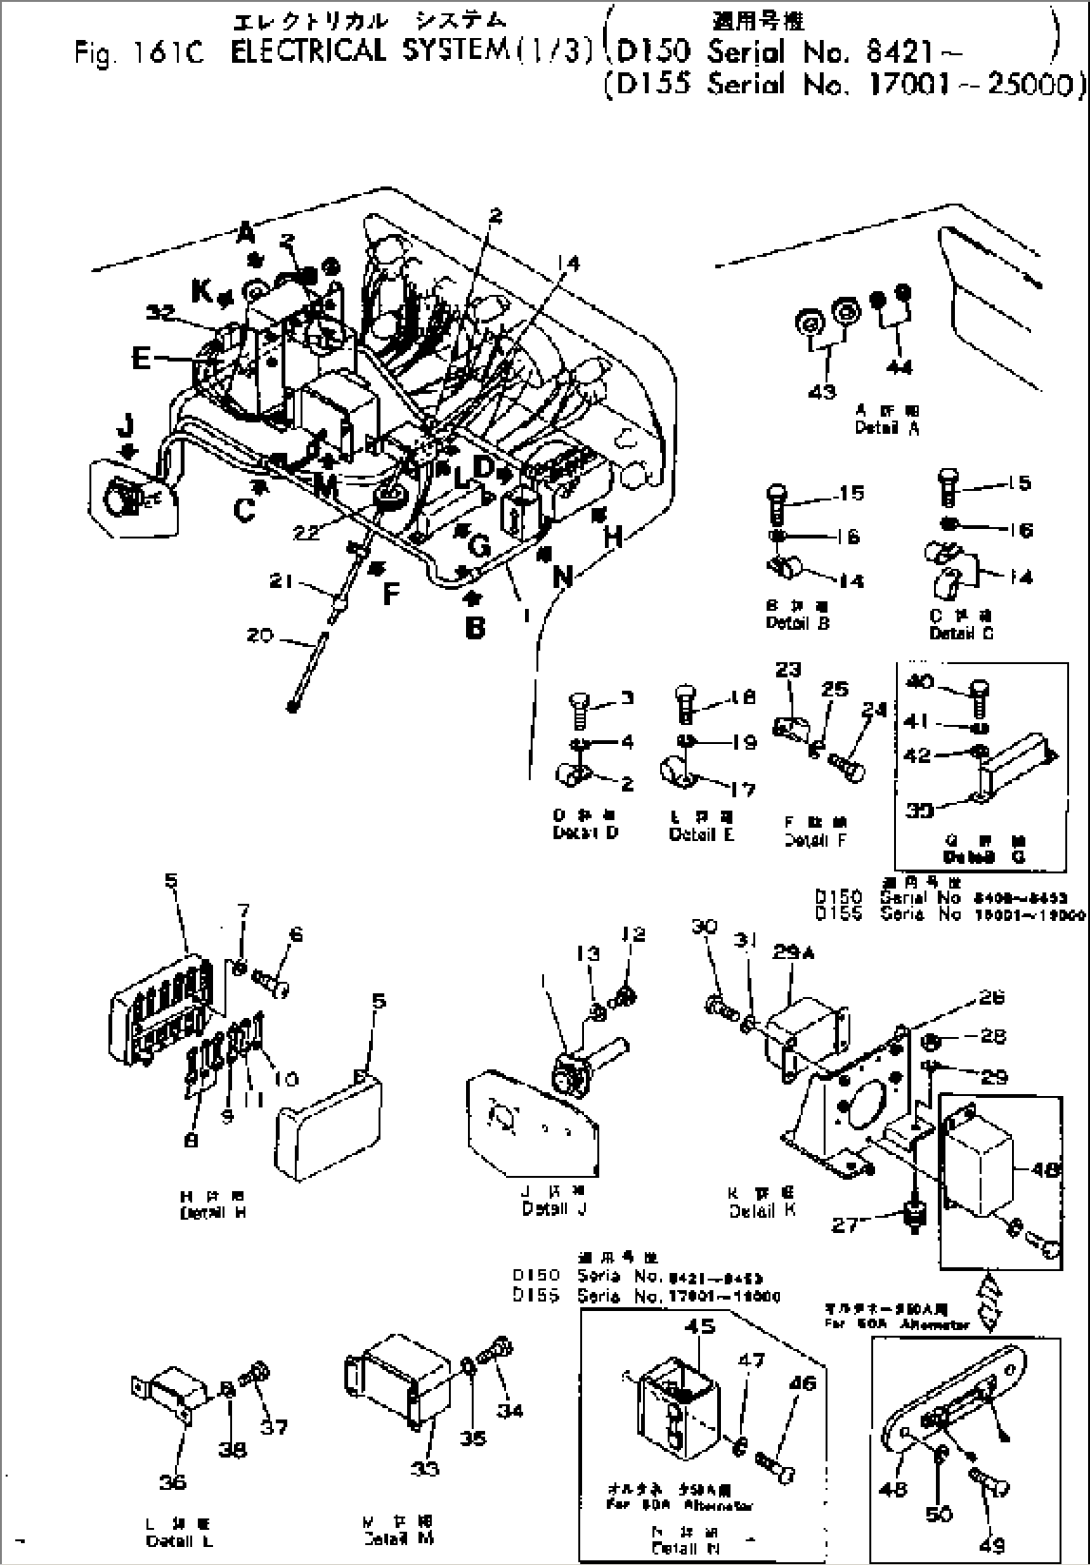 ELECTRICAL SYSTEM (1/3)(#8421-)